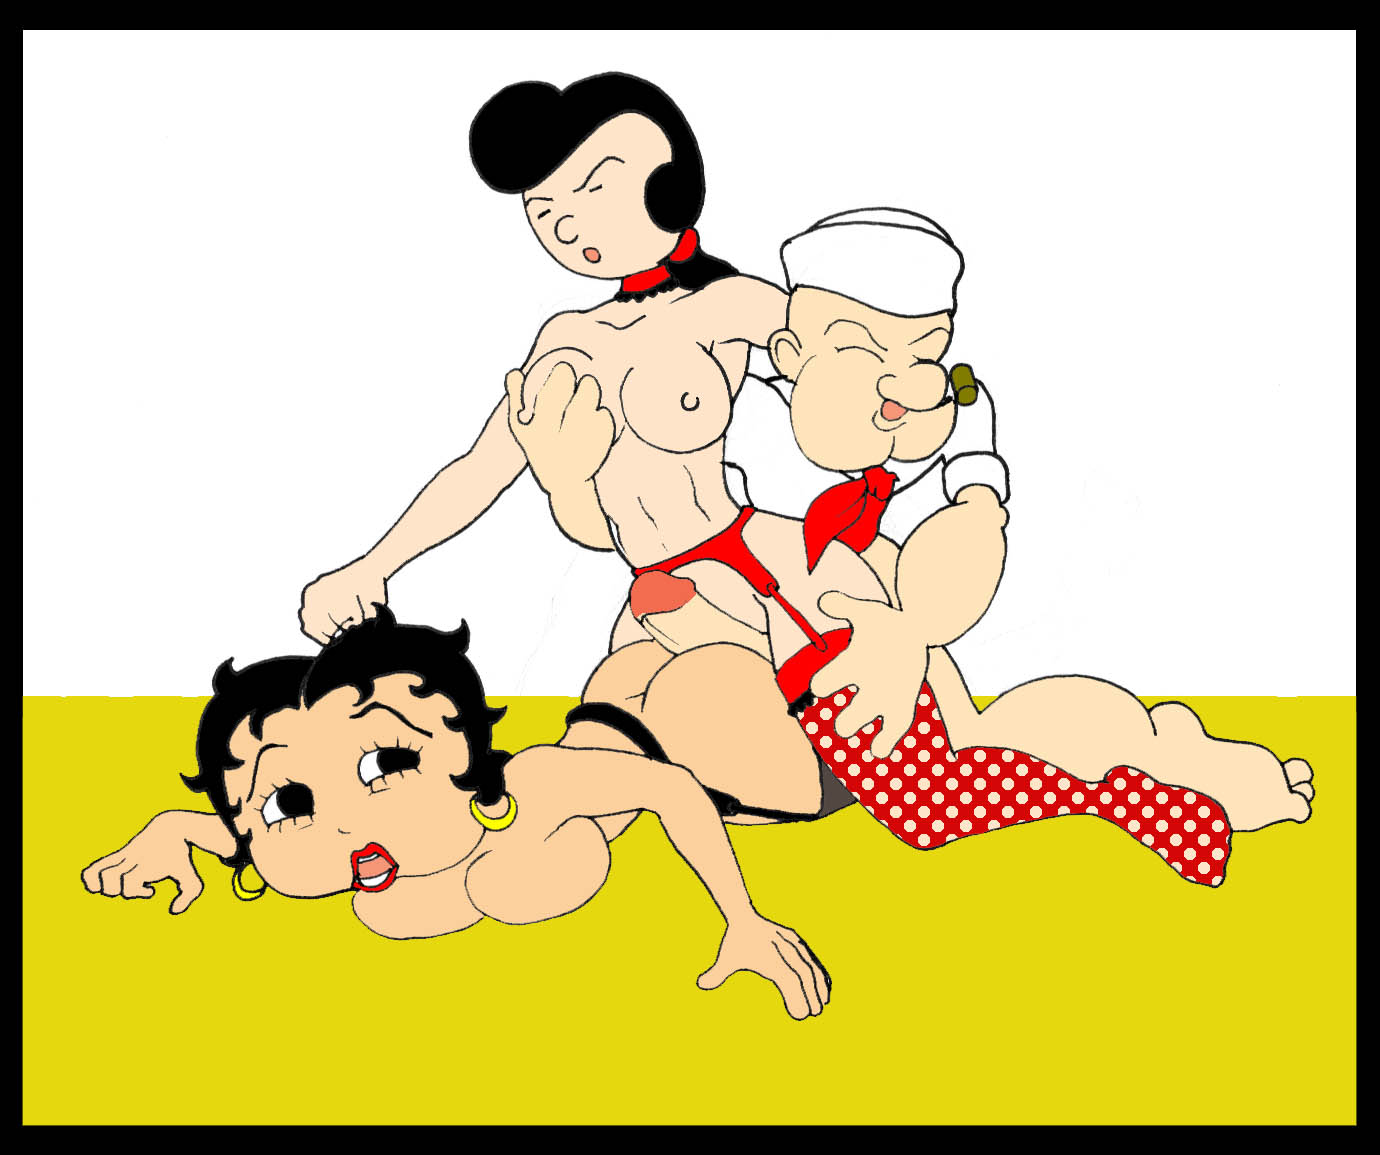 Cromisch Shiver me Timber (Betty Boop, Popeye) .